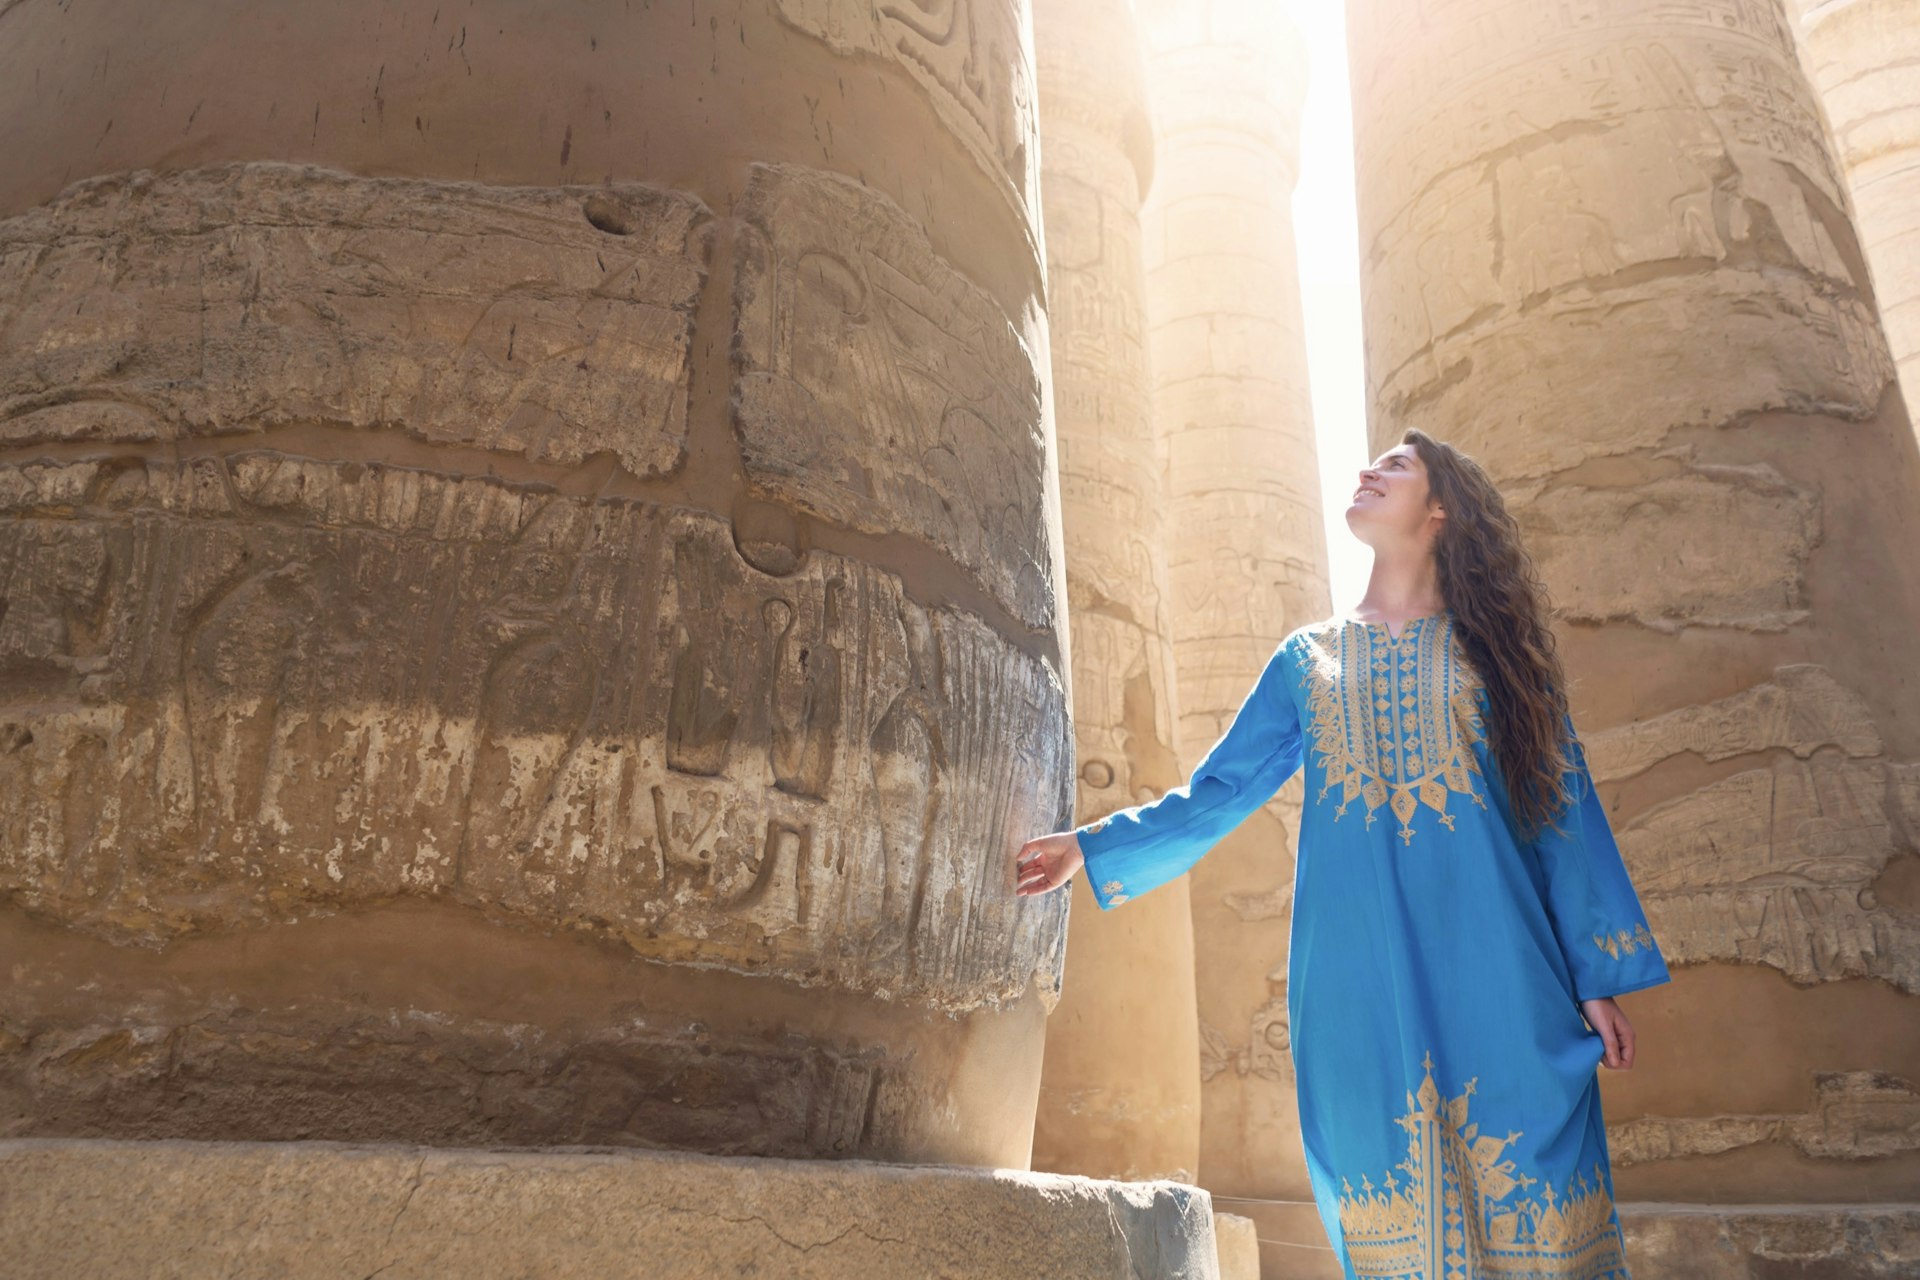 A woman tours the Great Temple of Amun in Karnak, Egypt.